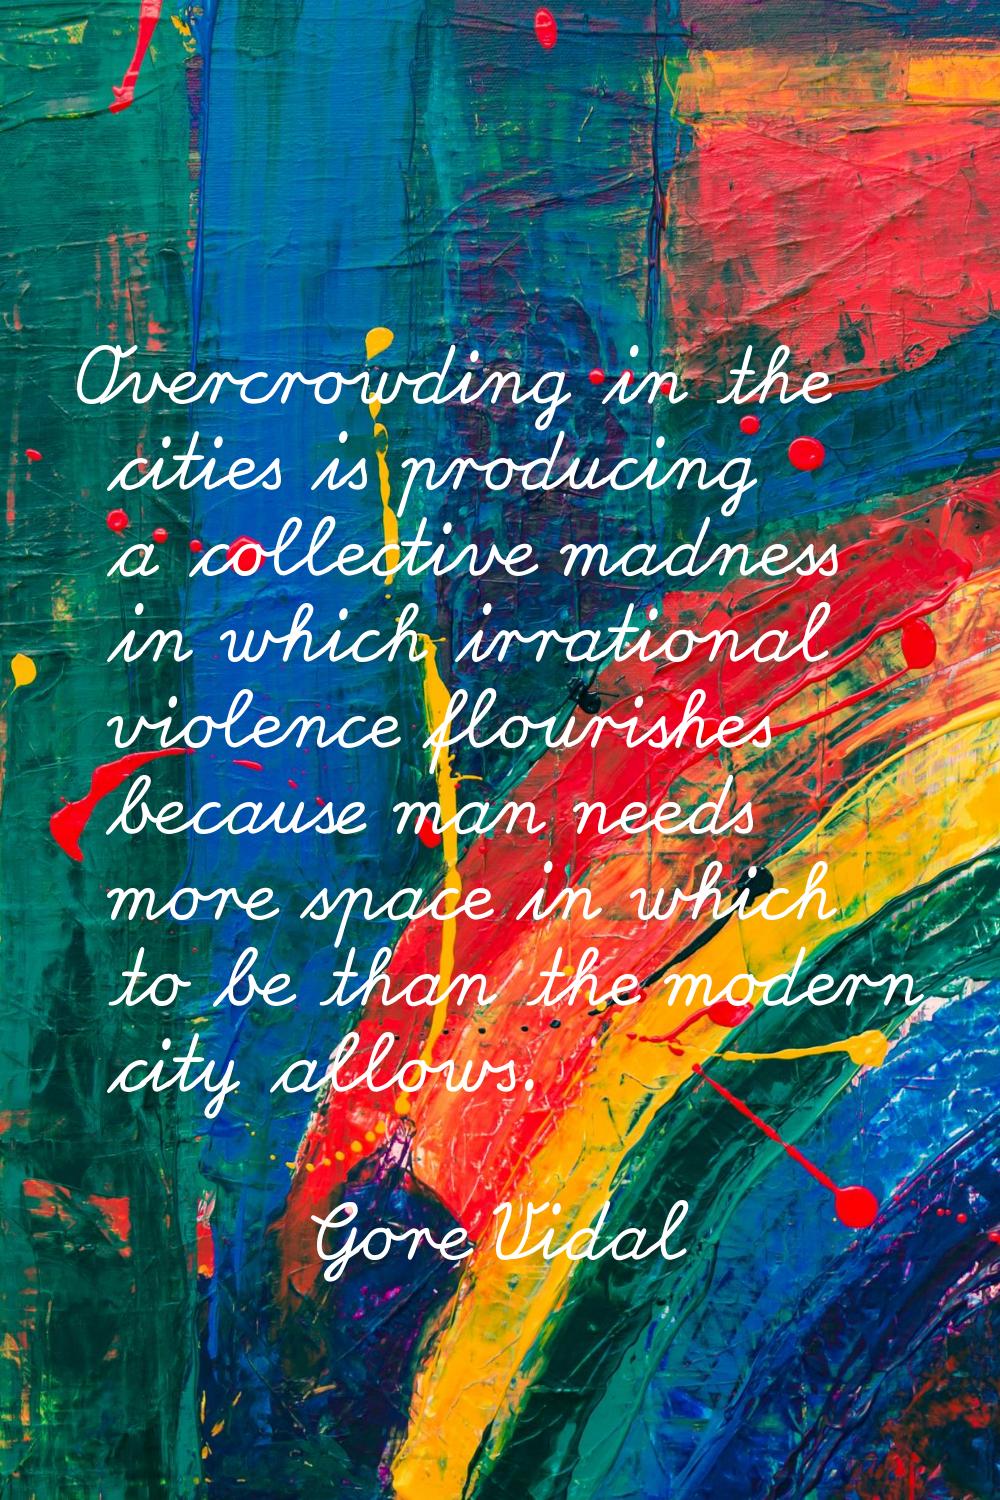 Overcrowding in the cities is producing a collective madness in which irrational violence flourishe